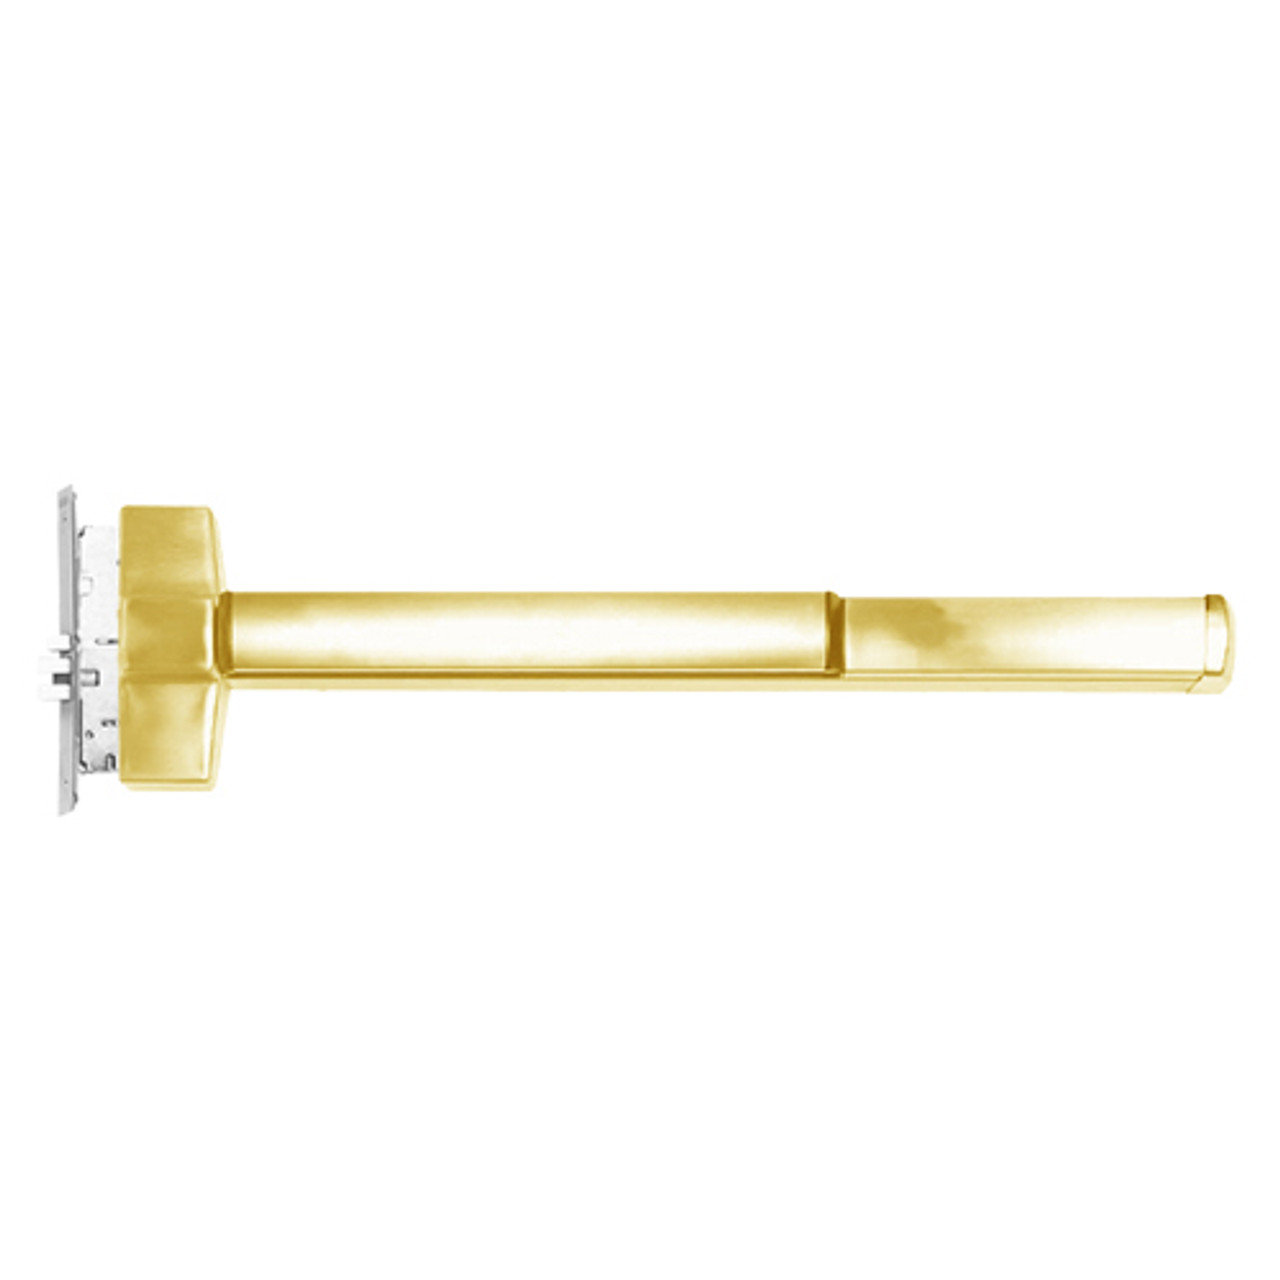 ED5600ATD-605-RHR Corbin ED5600 Series Fire Rated Mortise Exit Device with Delayed Egress in Bright Brass Finish